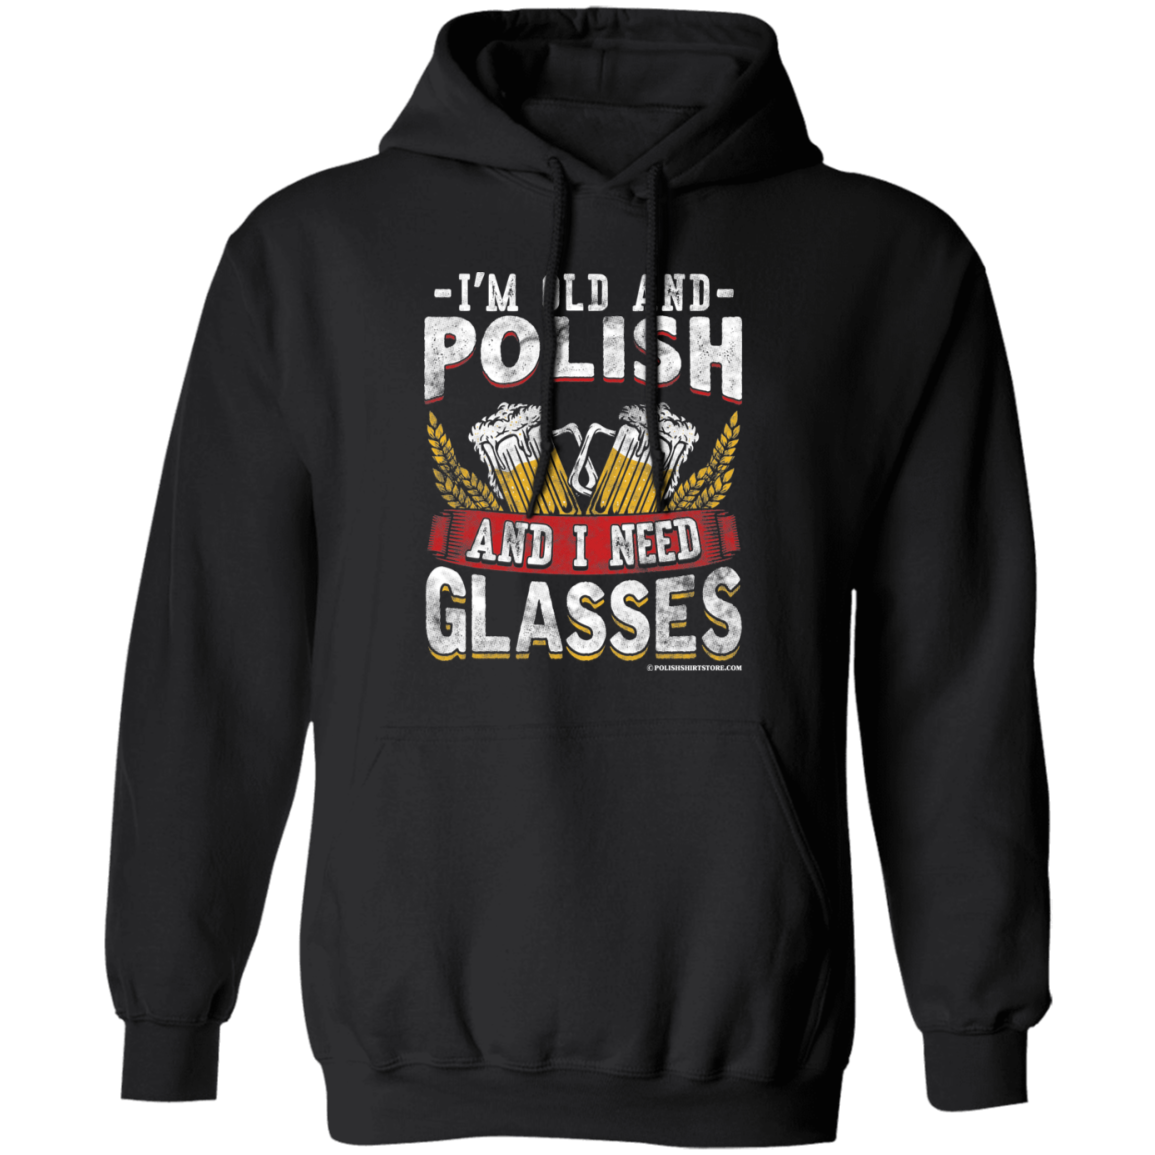 I'm Old And Polish And I Need Glasses Apparel CustomCat G185 Pullover Hoodie Black S